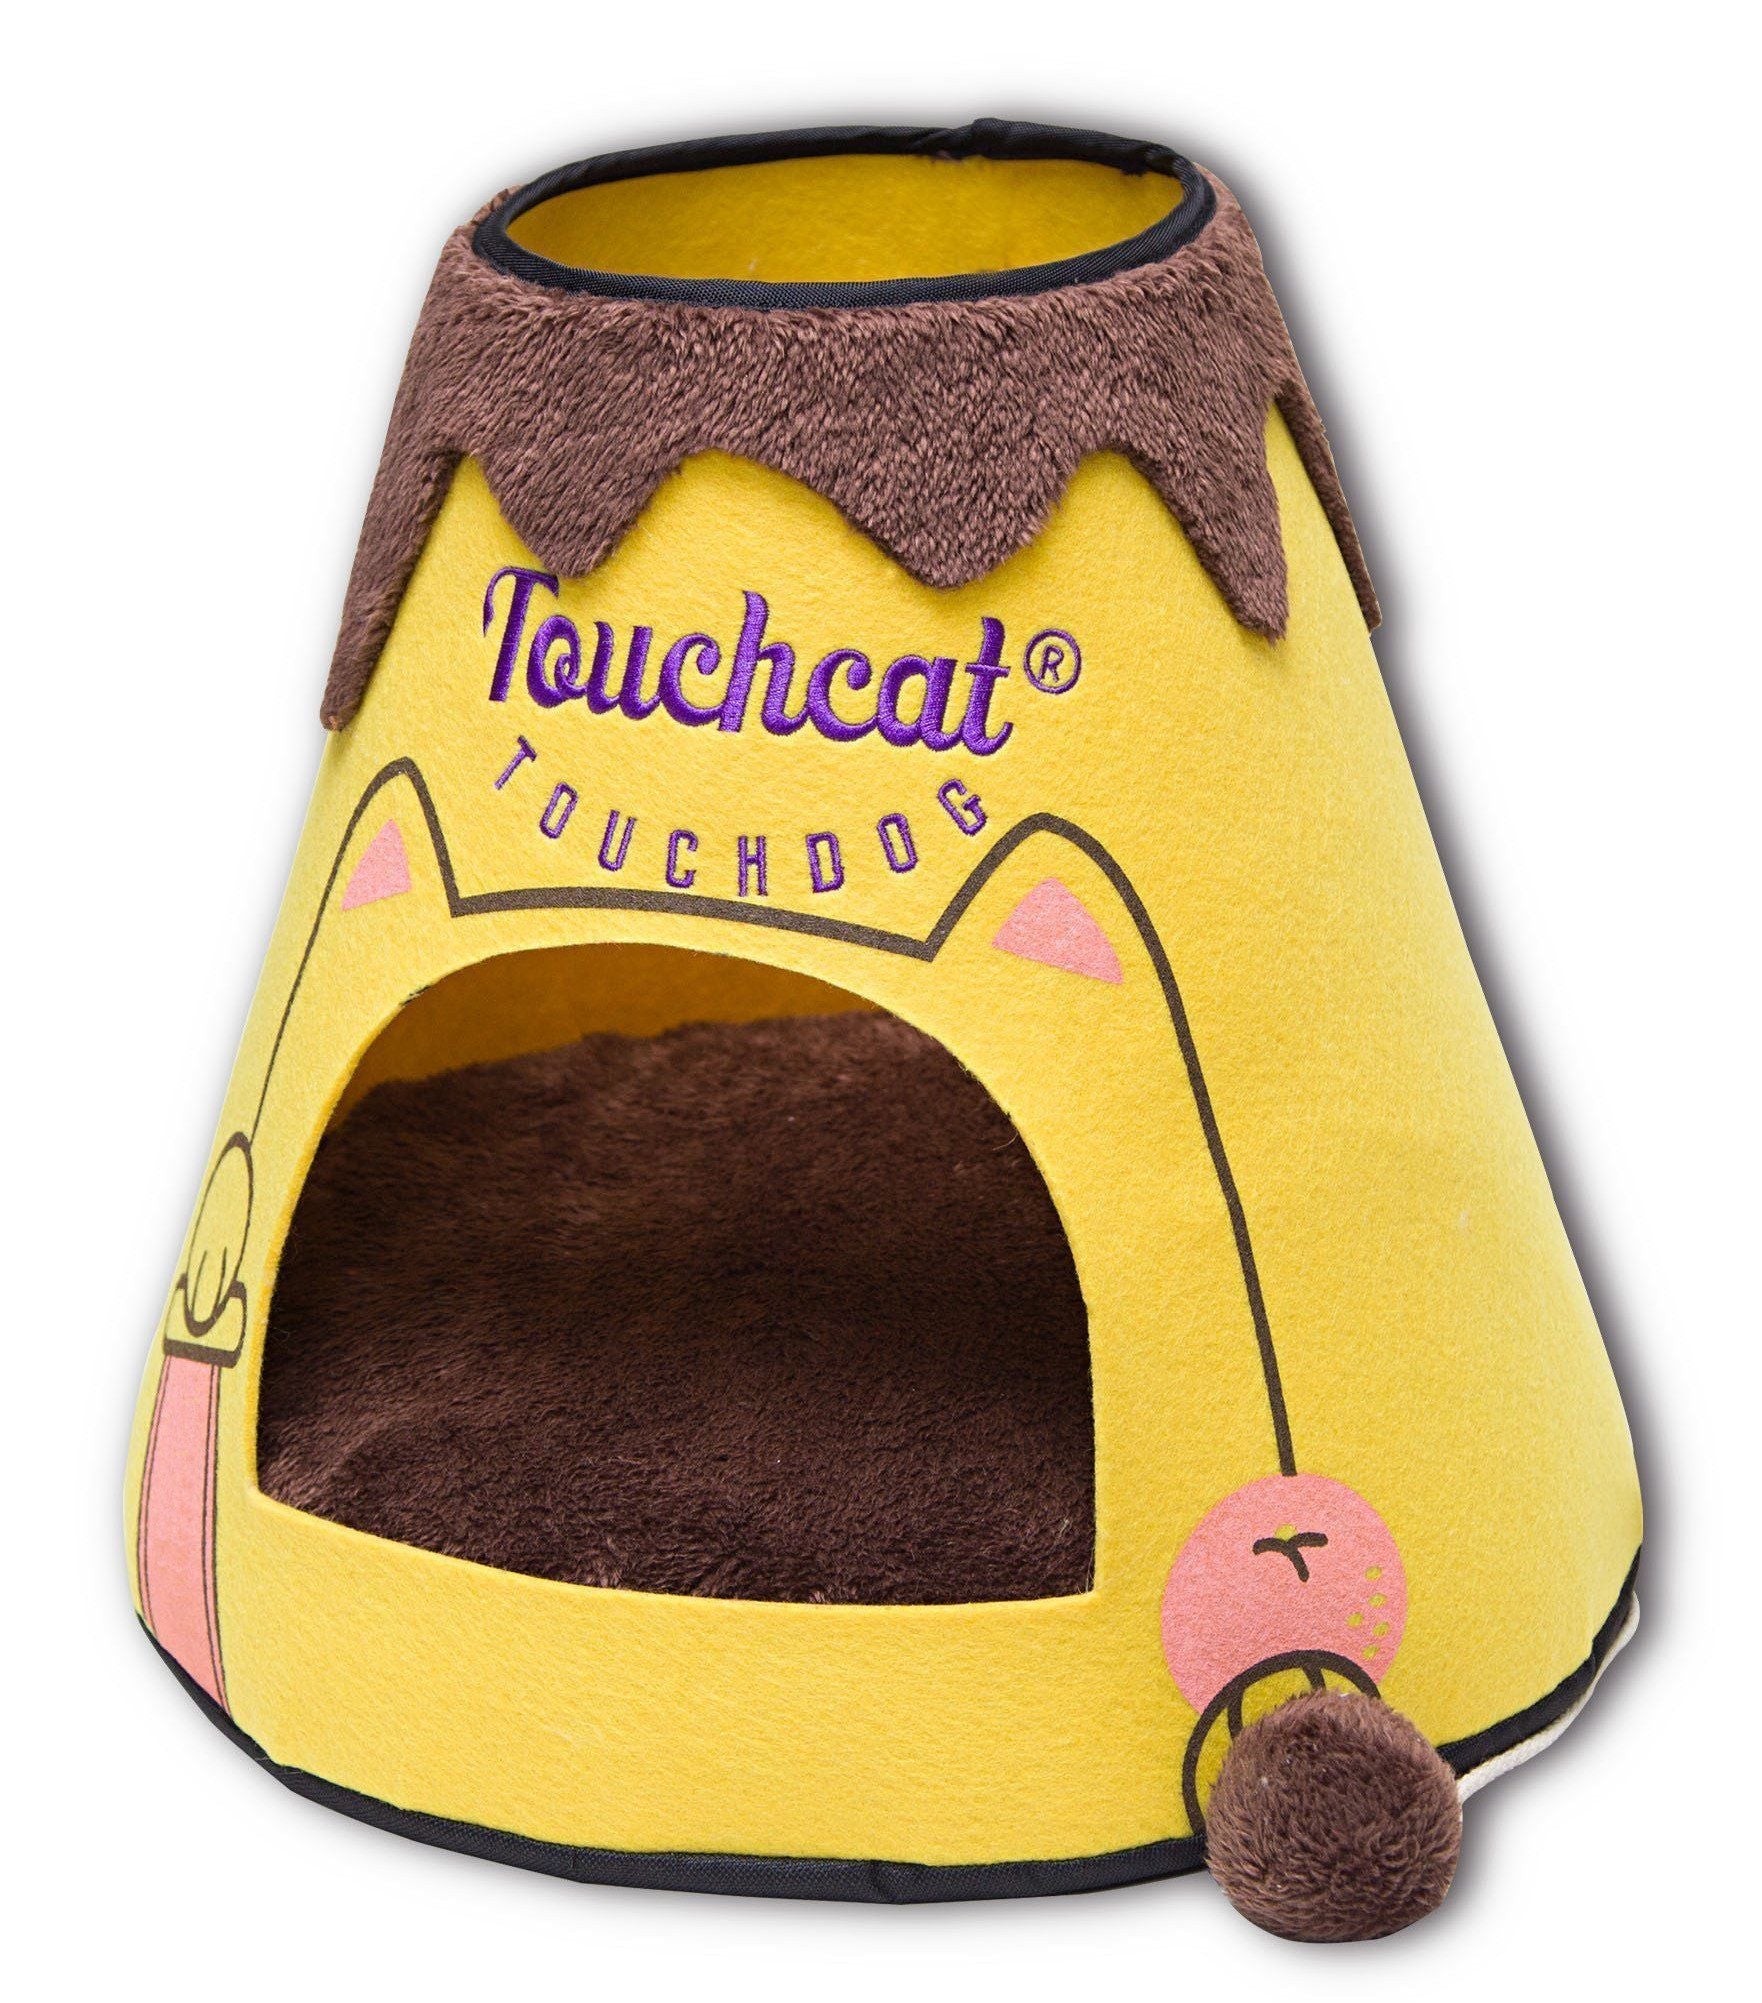 Touchcat ® 'Molten Lava' Triangular Frashion Designer Pet Kitty Cat Bed House Lounge Lounger w/ Hanging Teaser Toy Yellow/Brown 